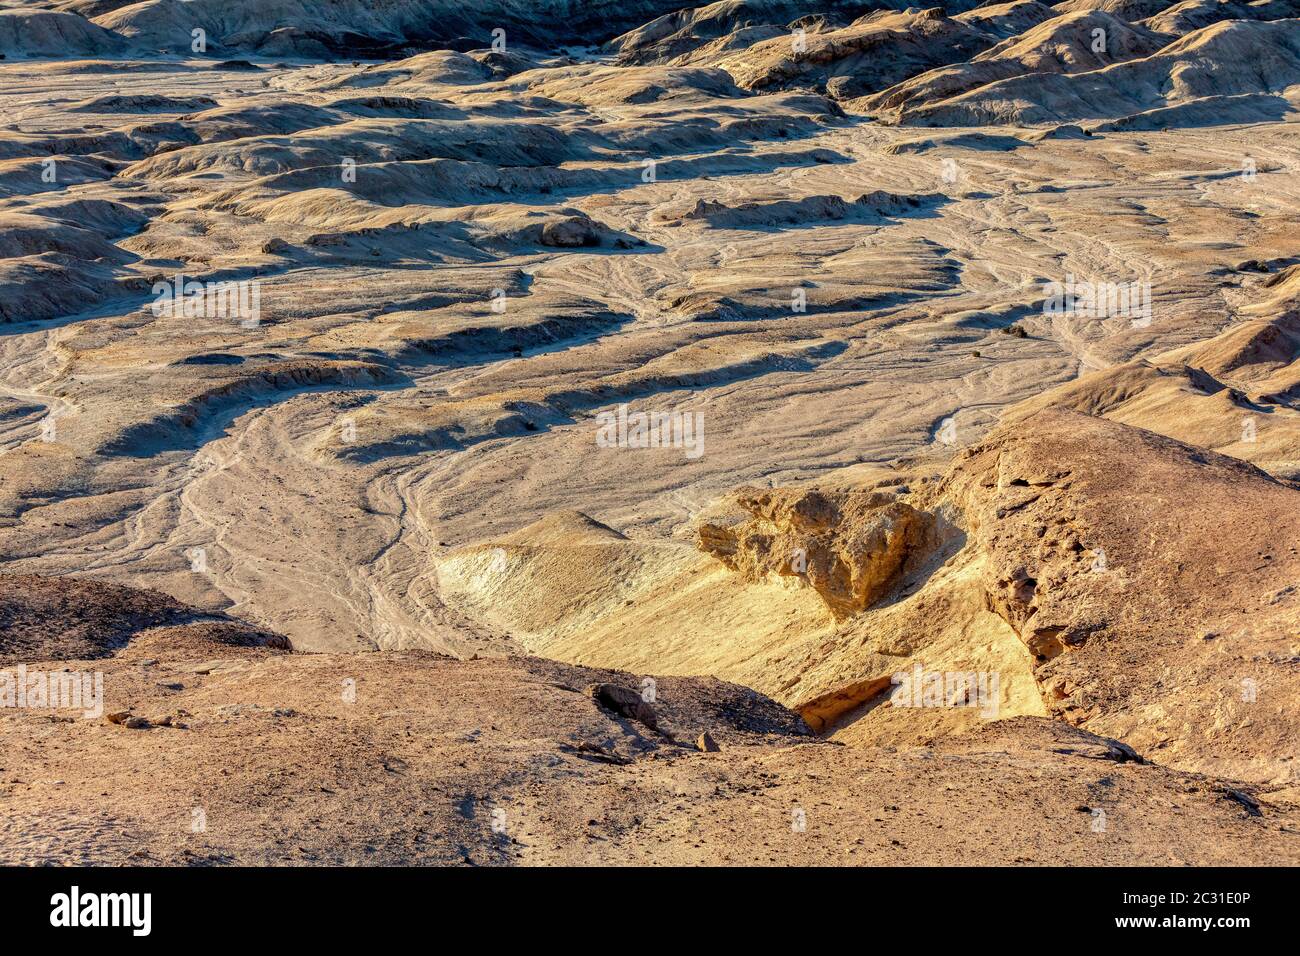 Incredible Namibia landscape like moonscape, Africa Stock Photo